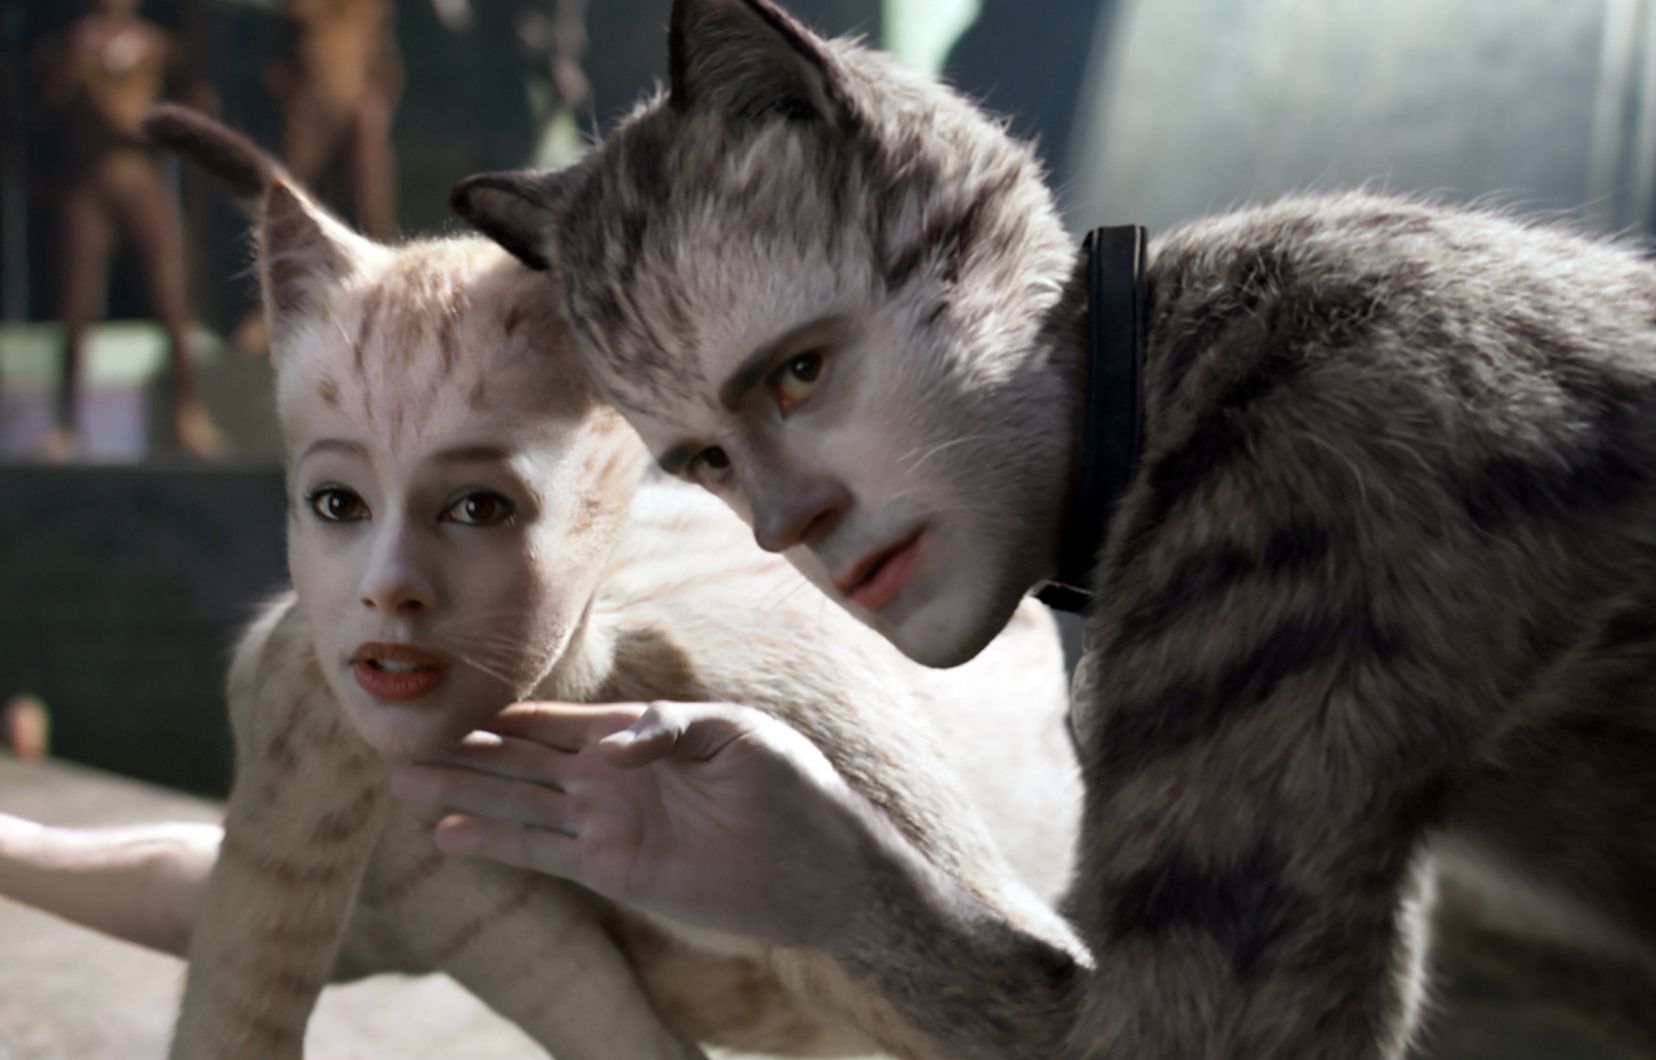 Cats, probably one of the worst films of 2019